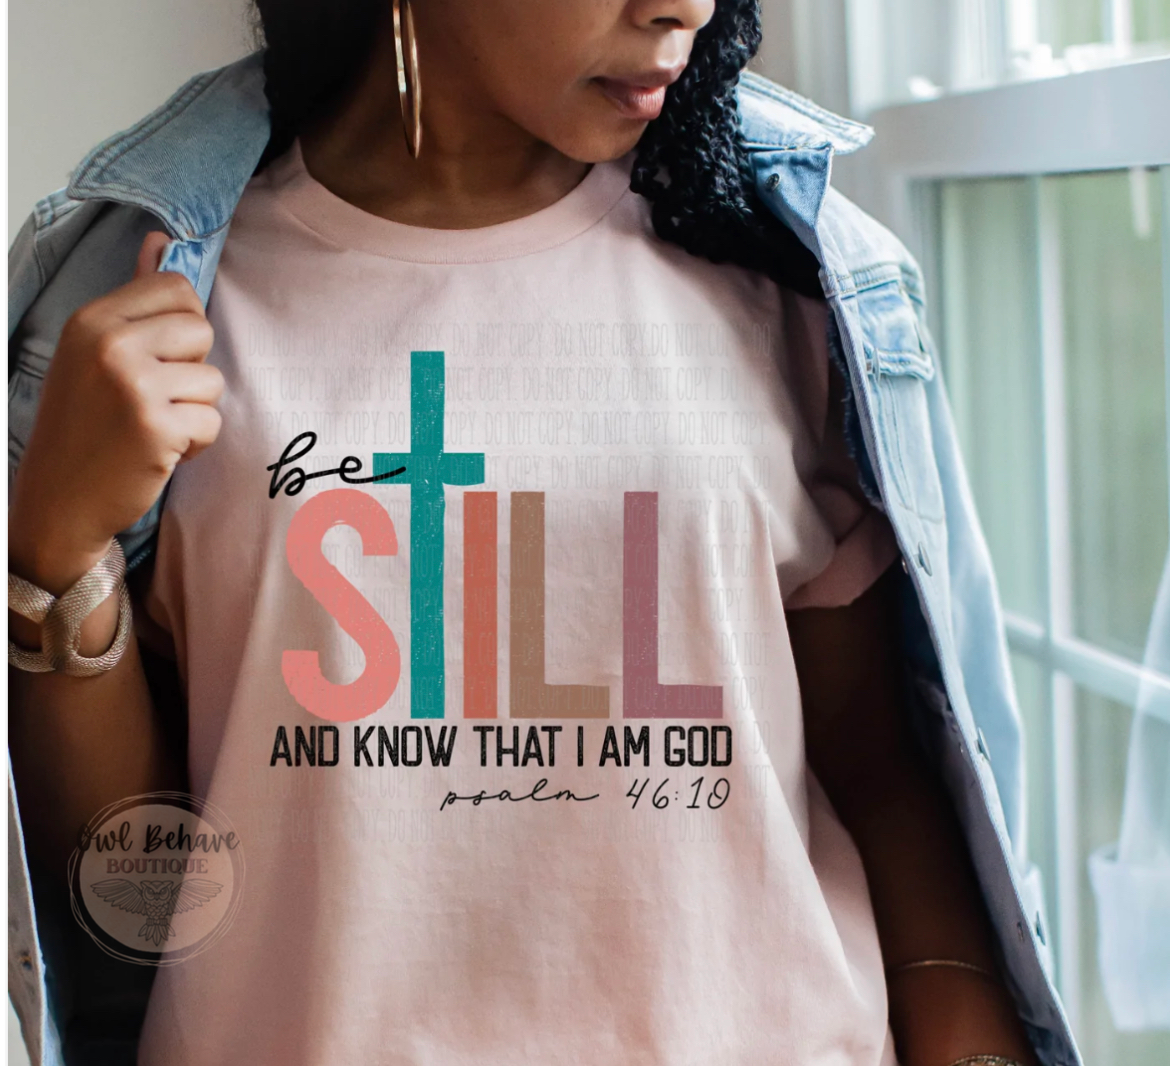 Be Still & Know Adult T-Shirt